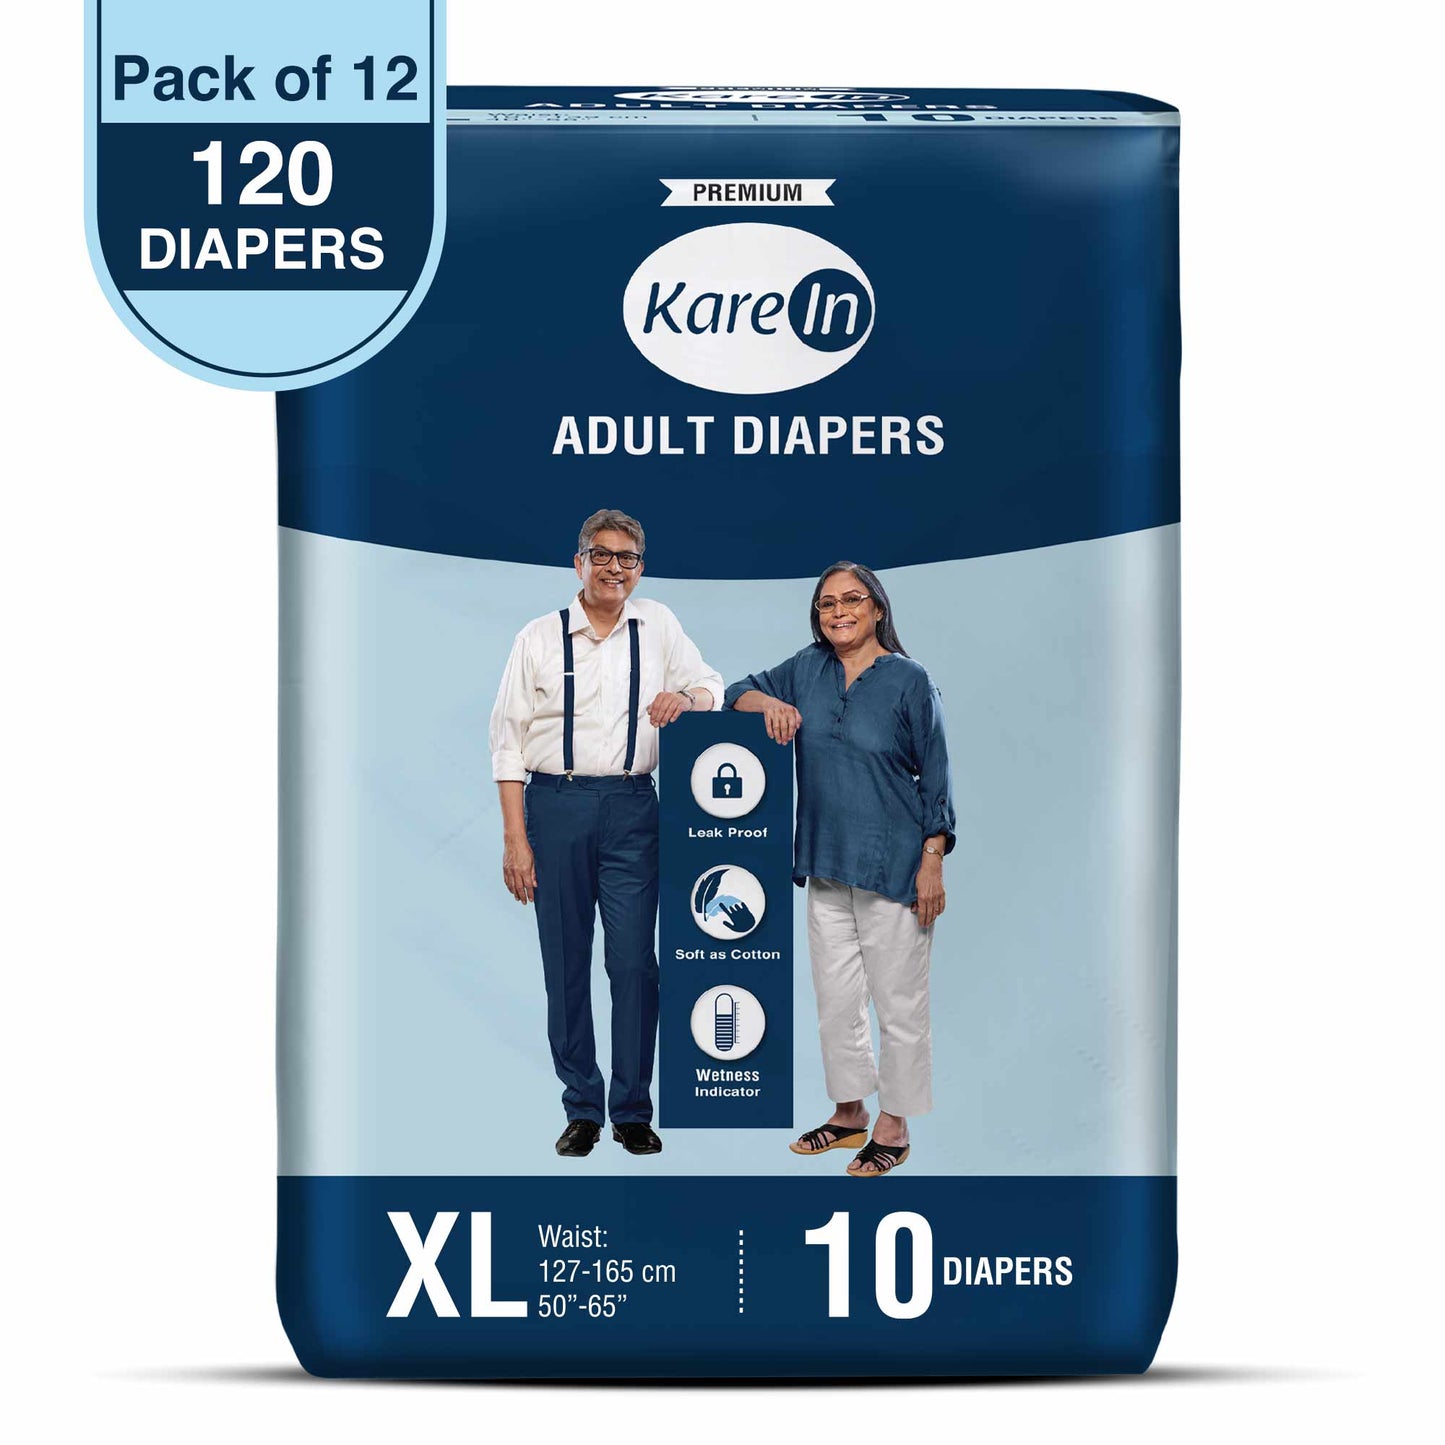 KareIn Premium Adult Diapers, Extra Large, Waist Size127-165 Cm (50"-65"), Tape Style, Unisex, High Absorbency, Leak Proof, Wetness Indicator, Pack of 12, 120 diapers